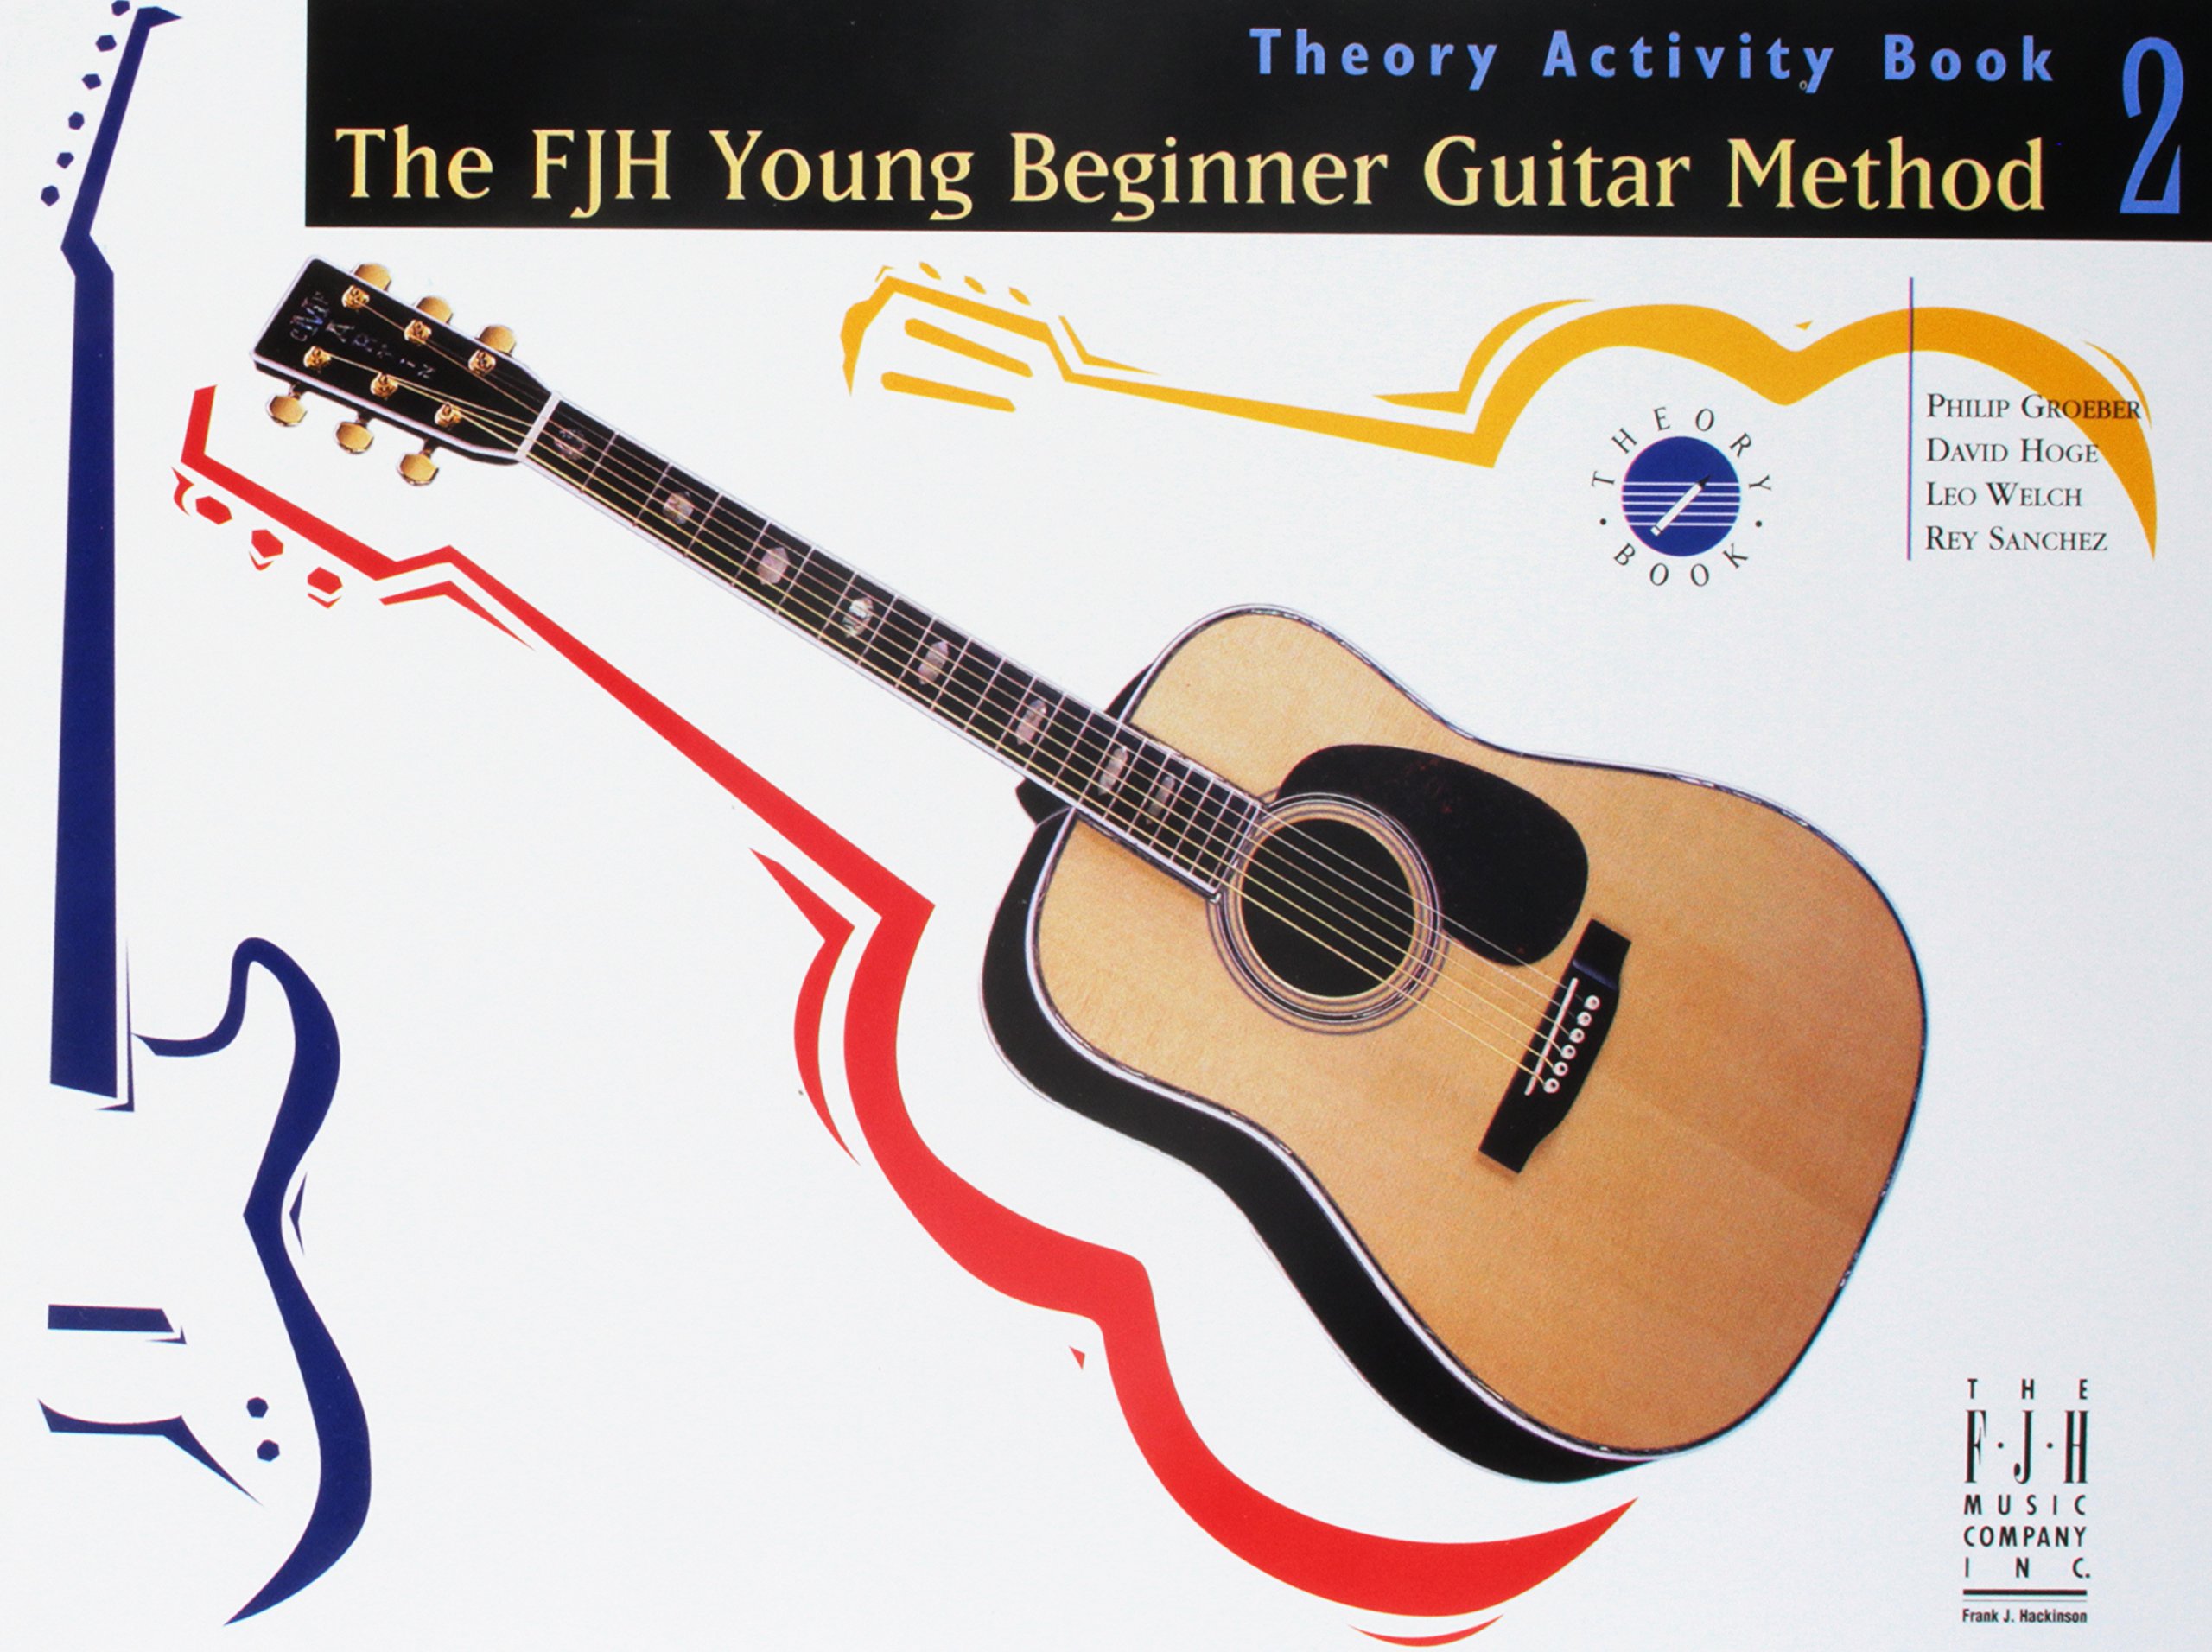 FJH Young Beginner Guitar Method, Theory Activity Book 2